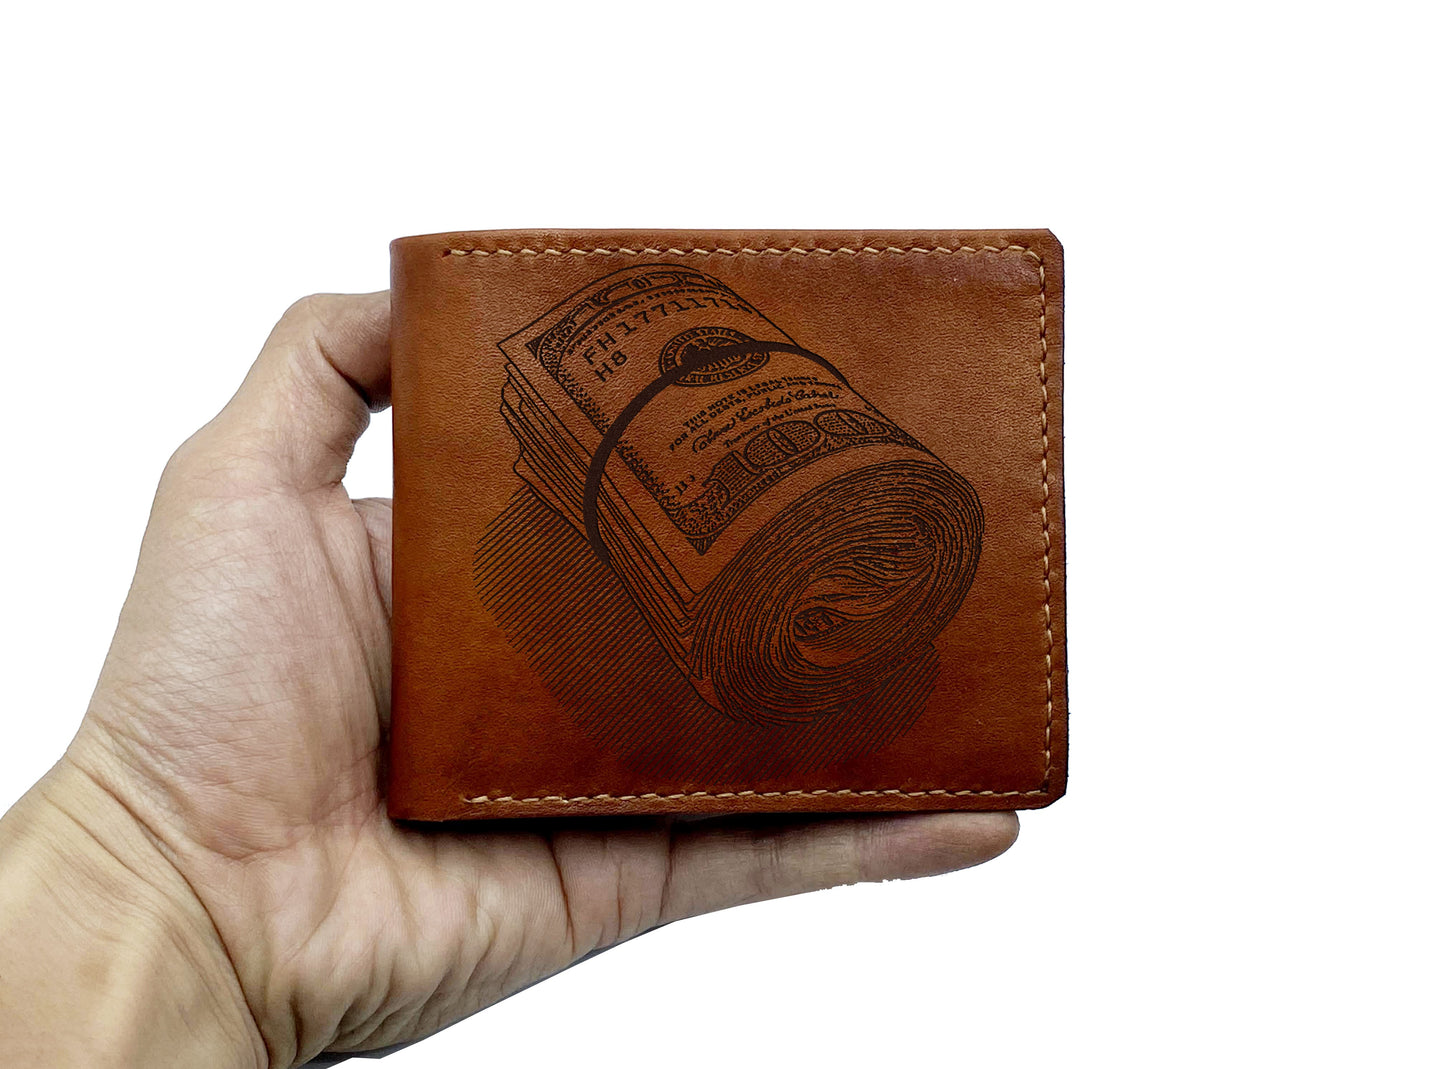 Personalized leather men's wallet, cash dollars sign leather wallet, funny fortunes gift for men